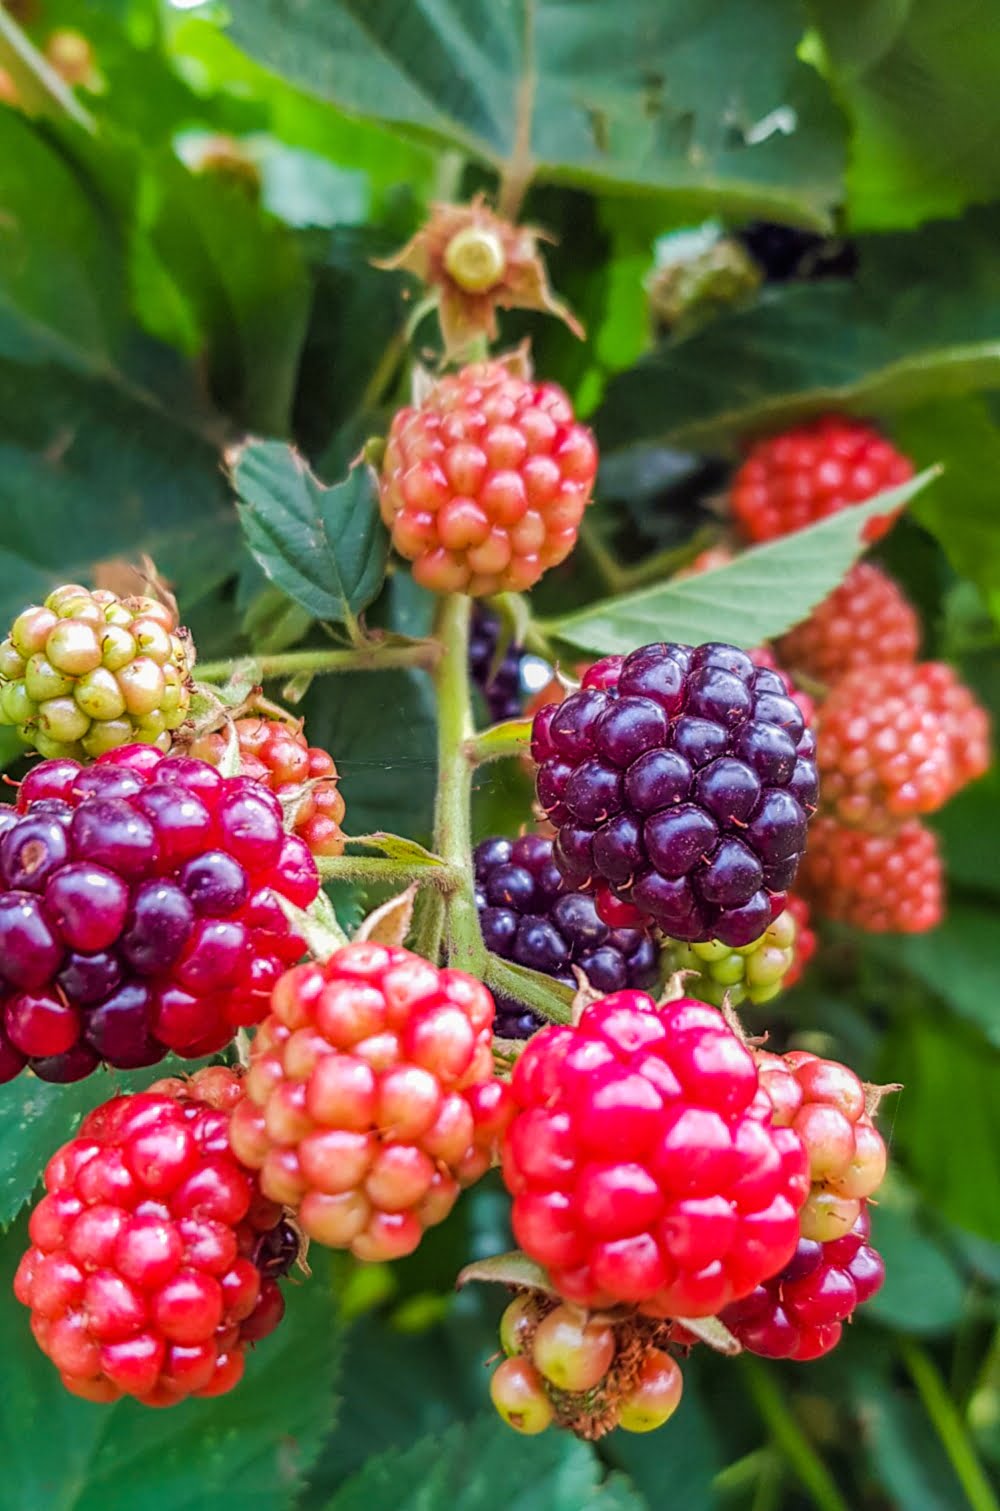 Learning how to grow organic berries from an expert